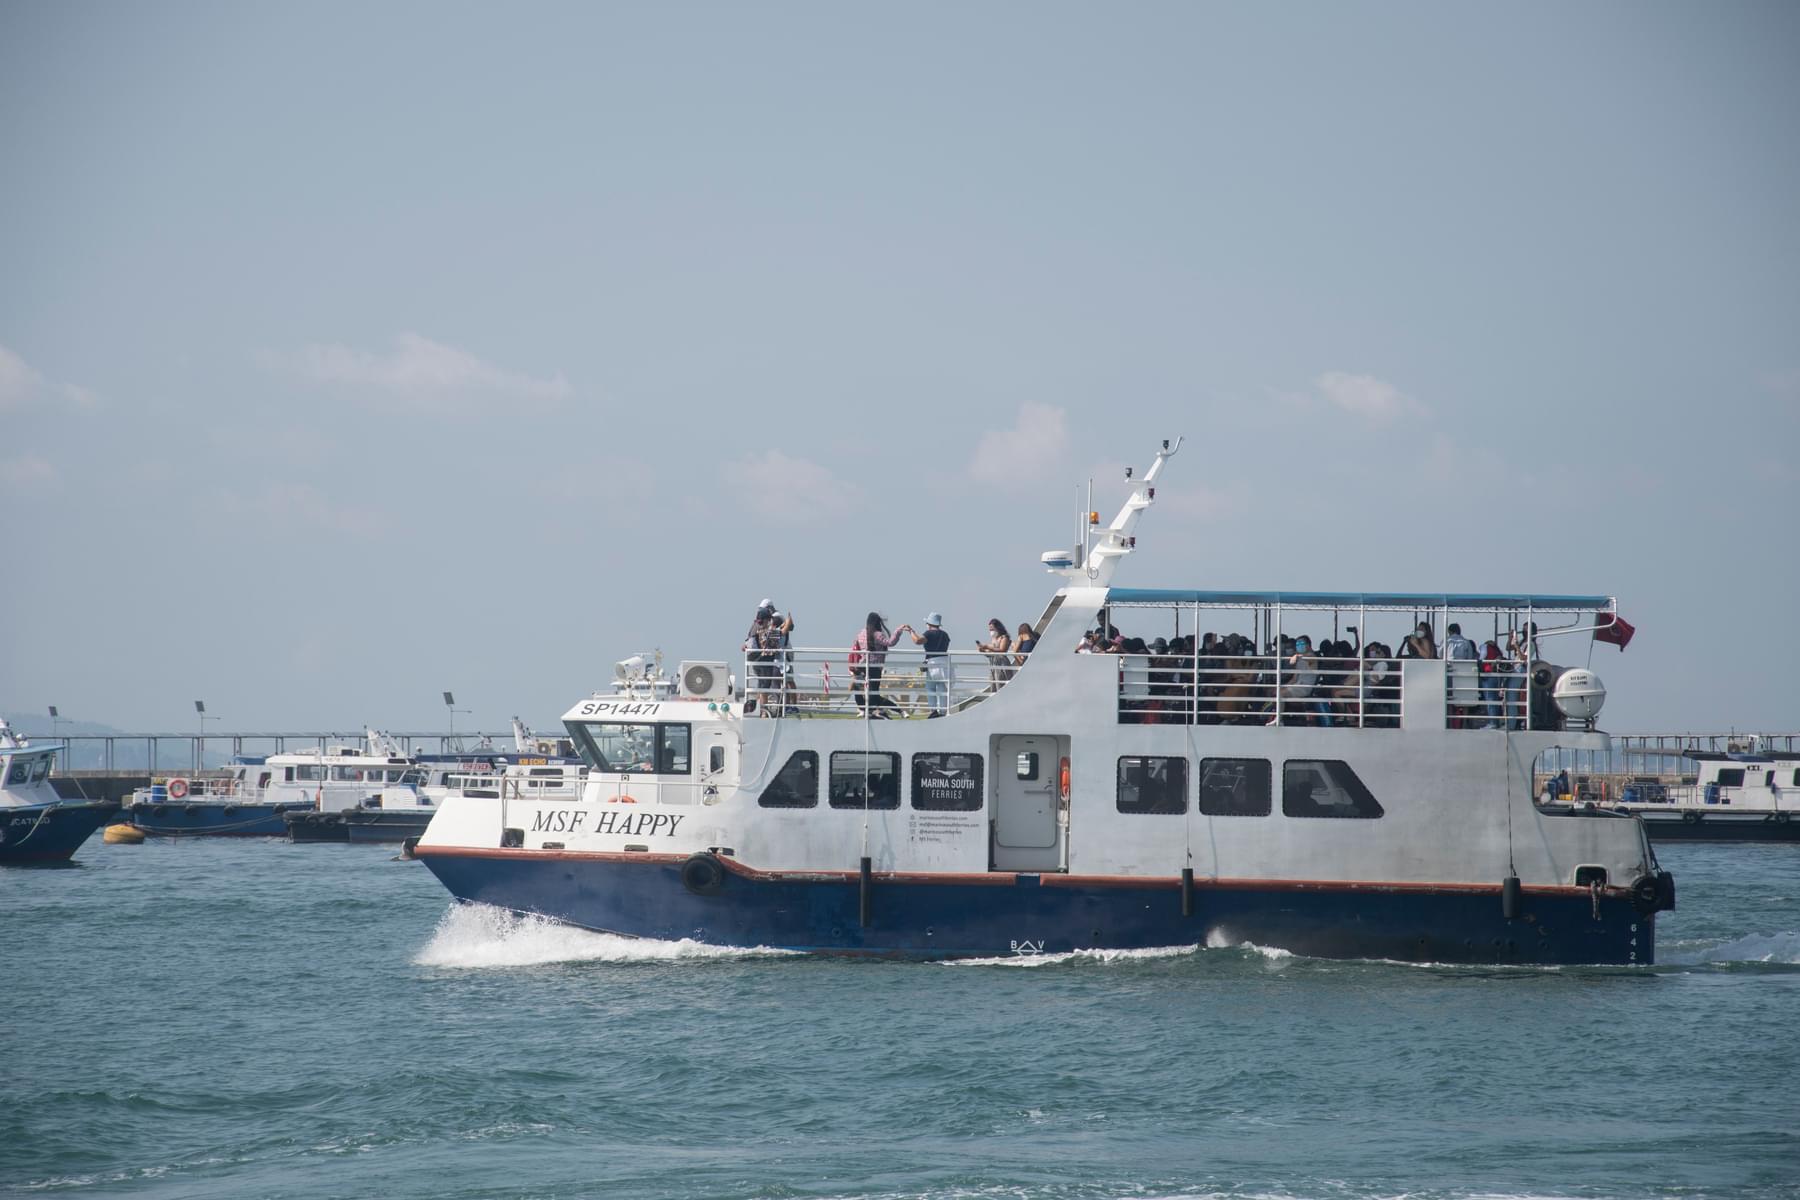  Singapore Southern Islands Guided Yacht Tour With Cable Car Ticket